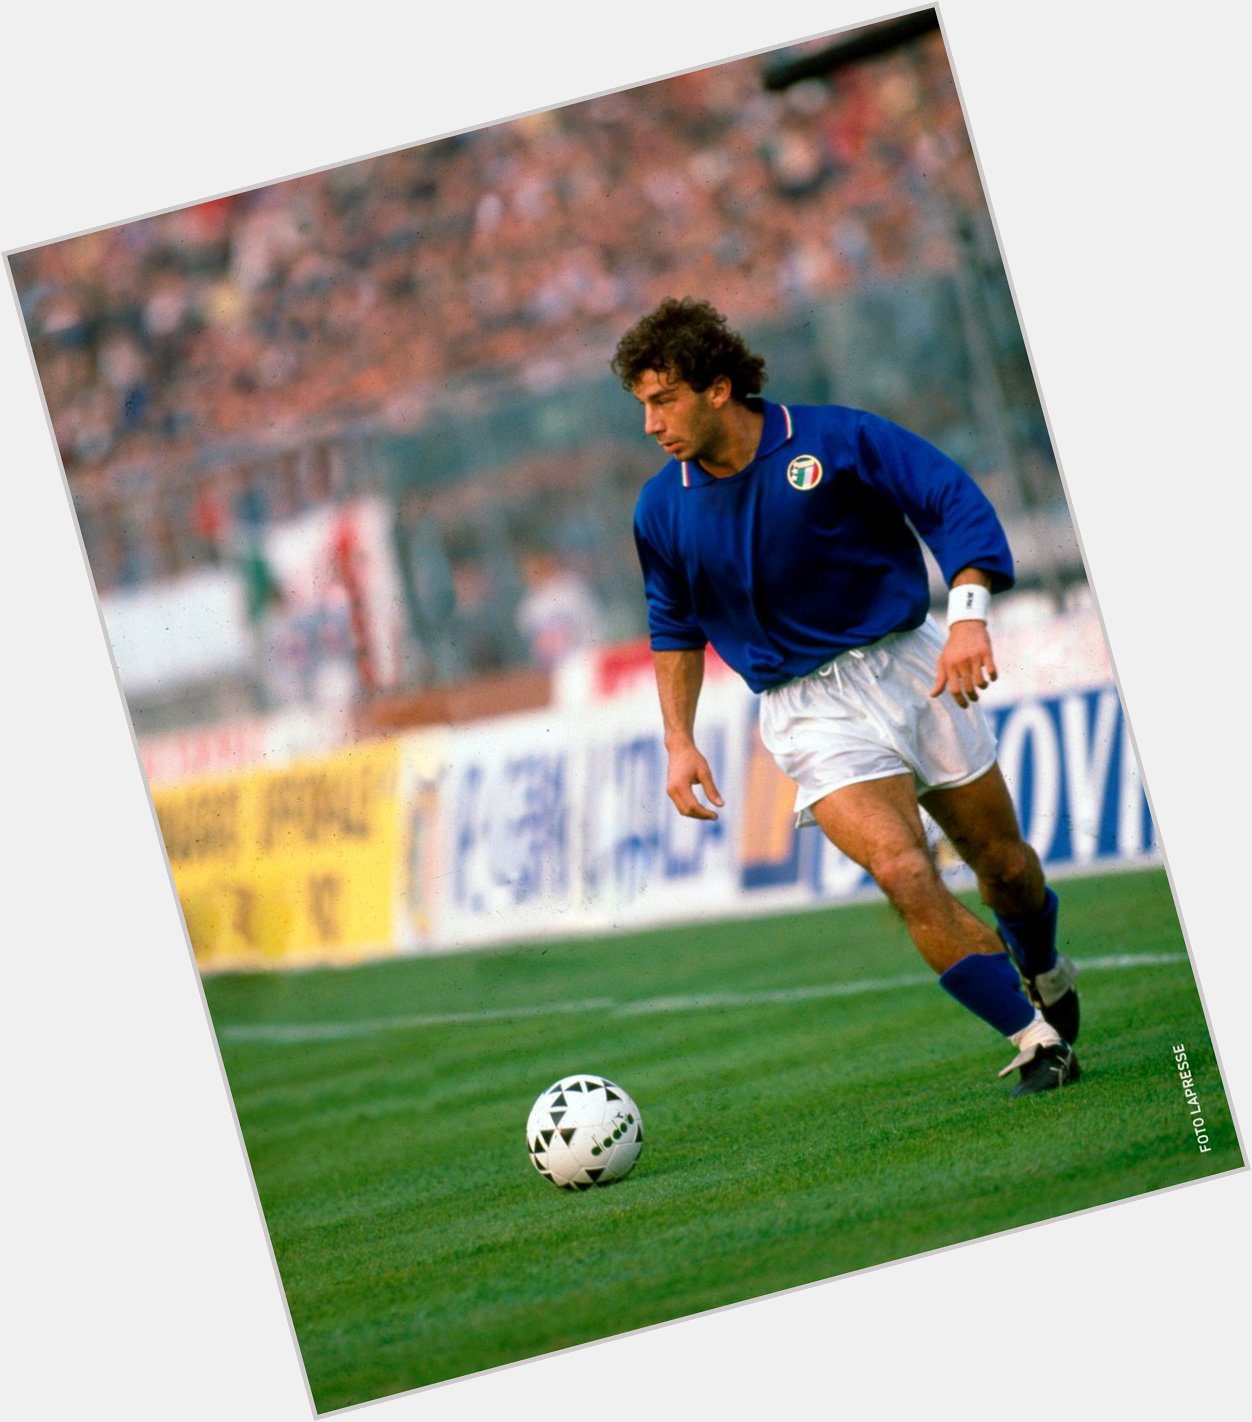 More than 300 apps, more than 100 goals in  Happy birthday, Gianluca Vialli 